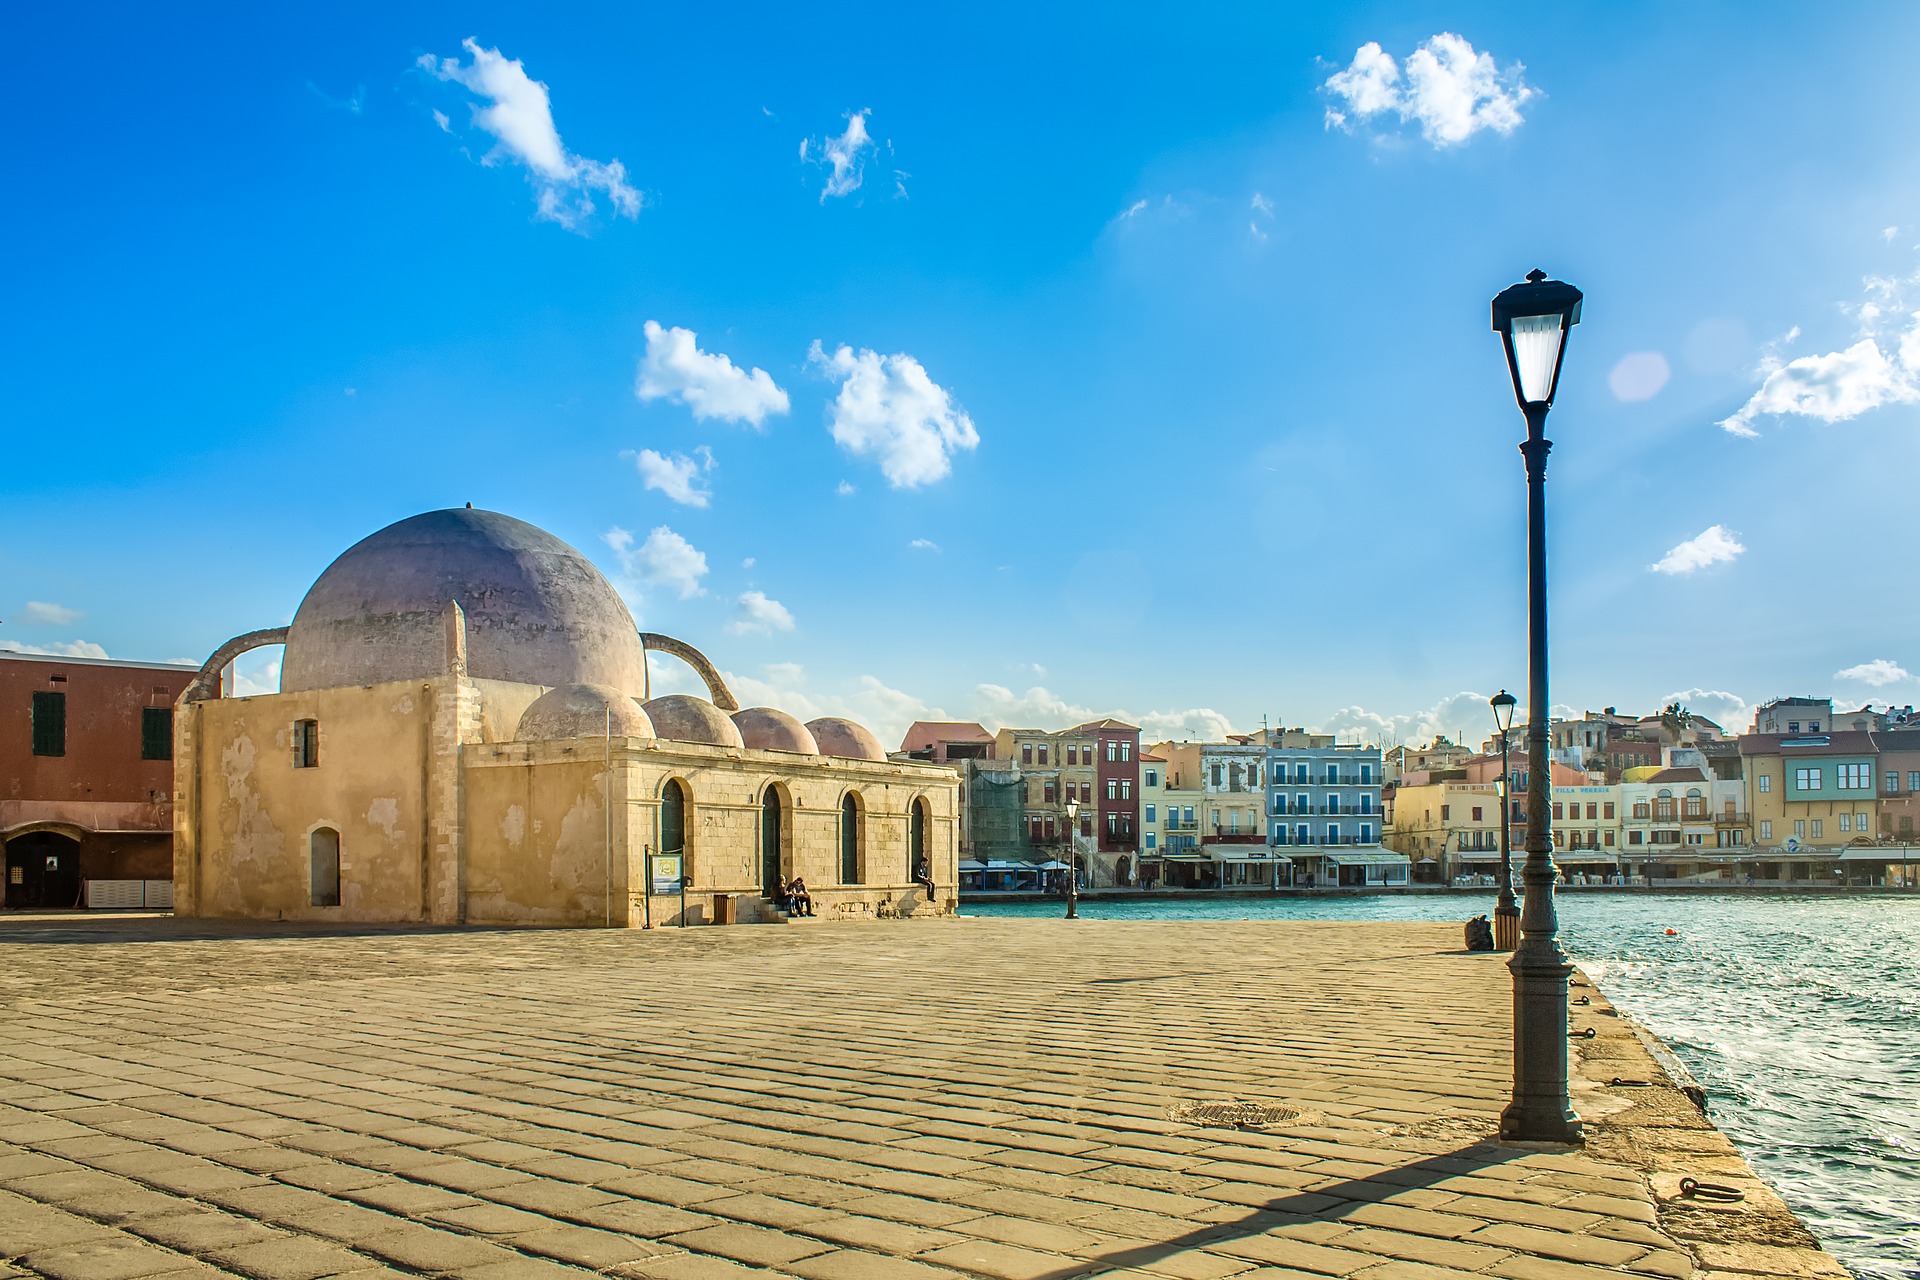 Winter In Chania: When The Tourists Are Gone